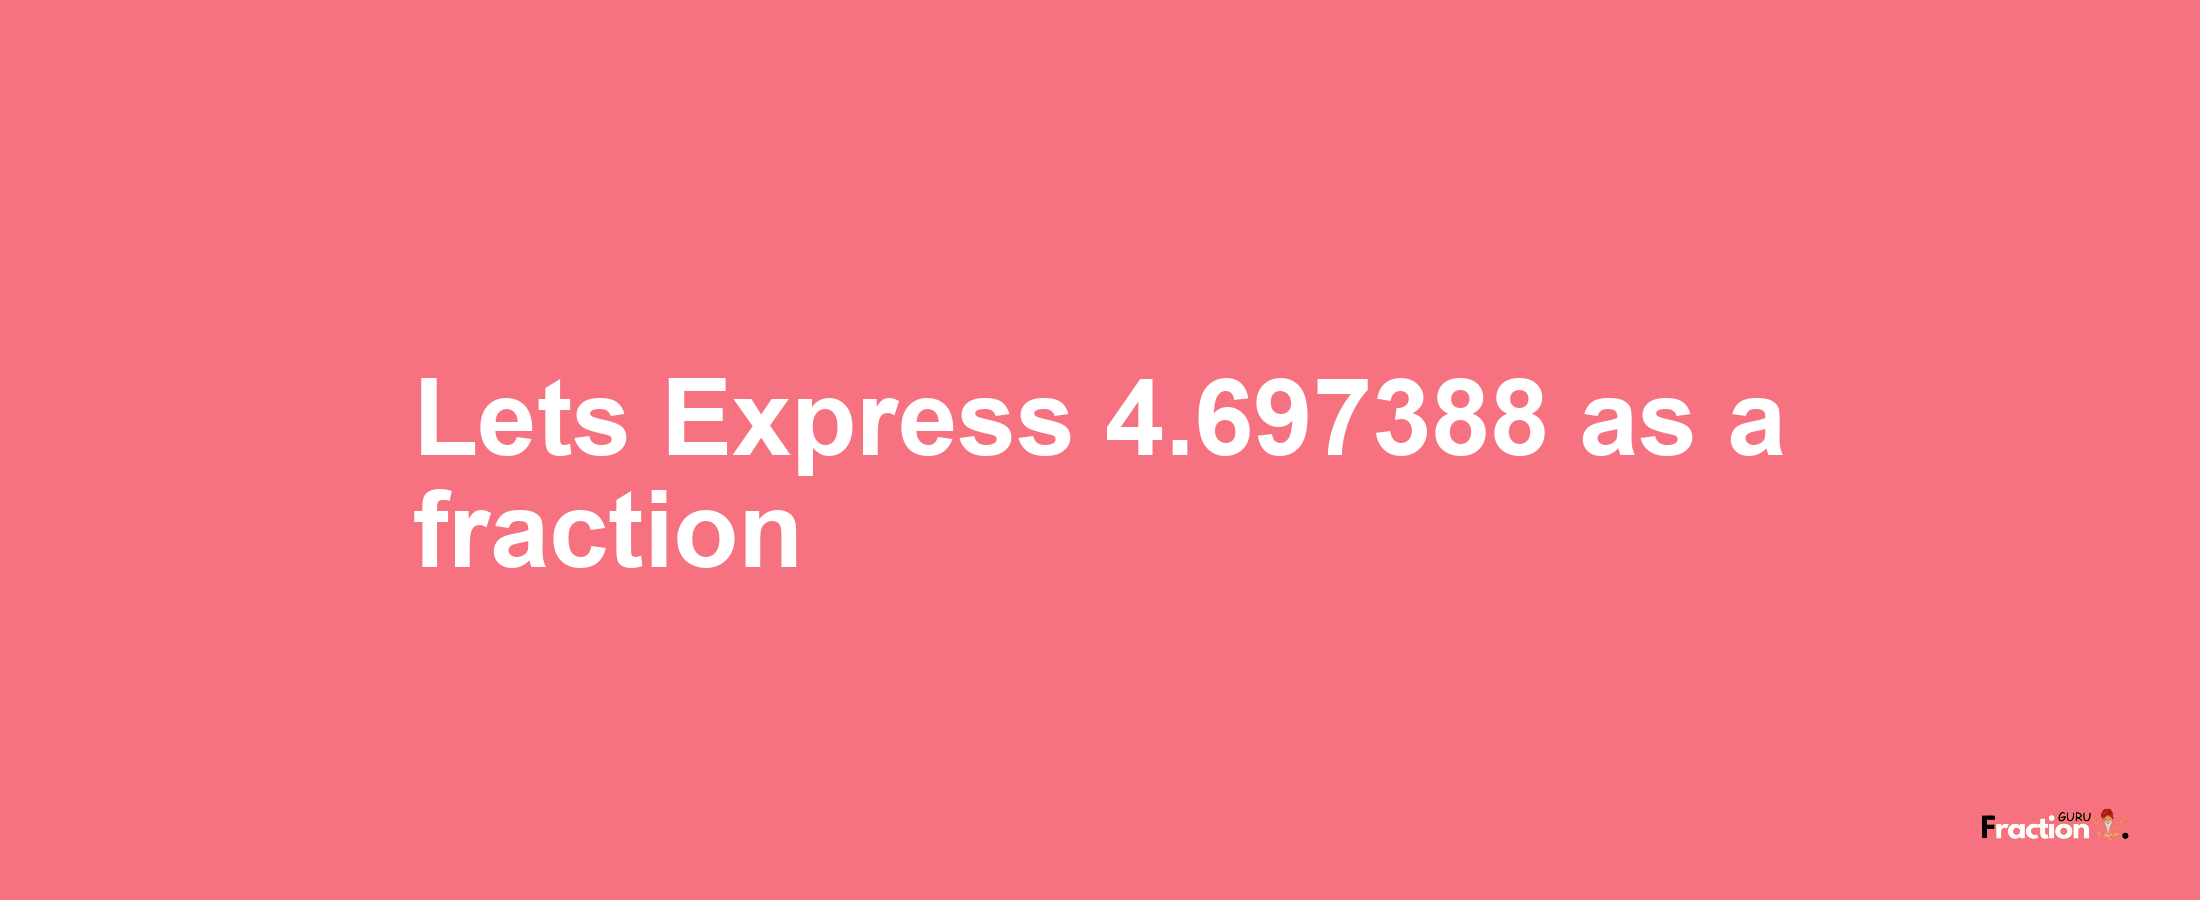 Lets Express 4.697388 as afraction